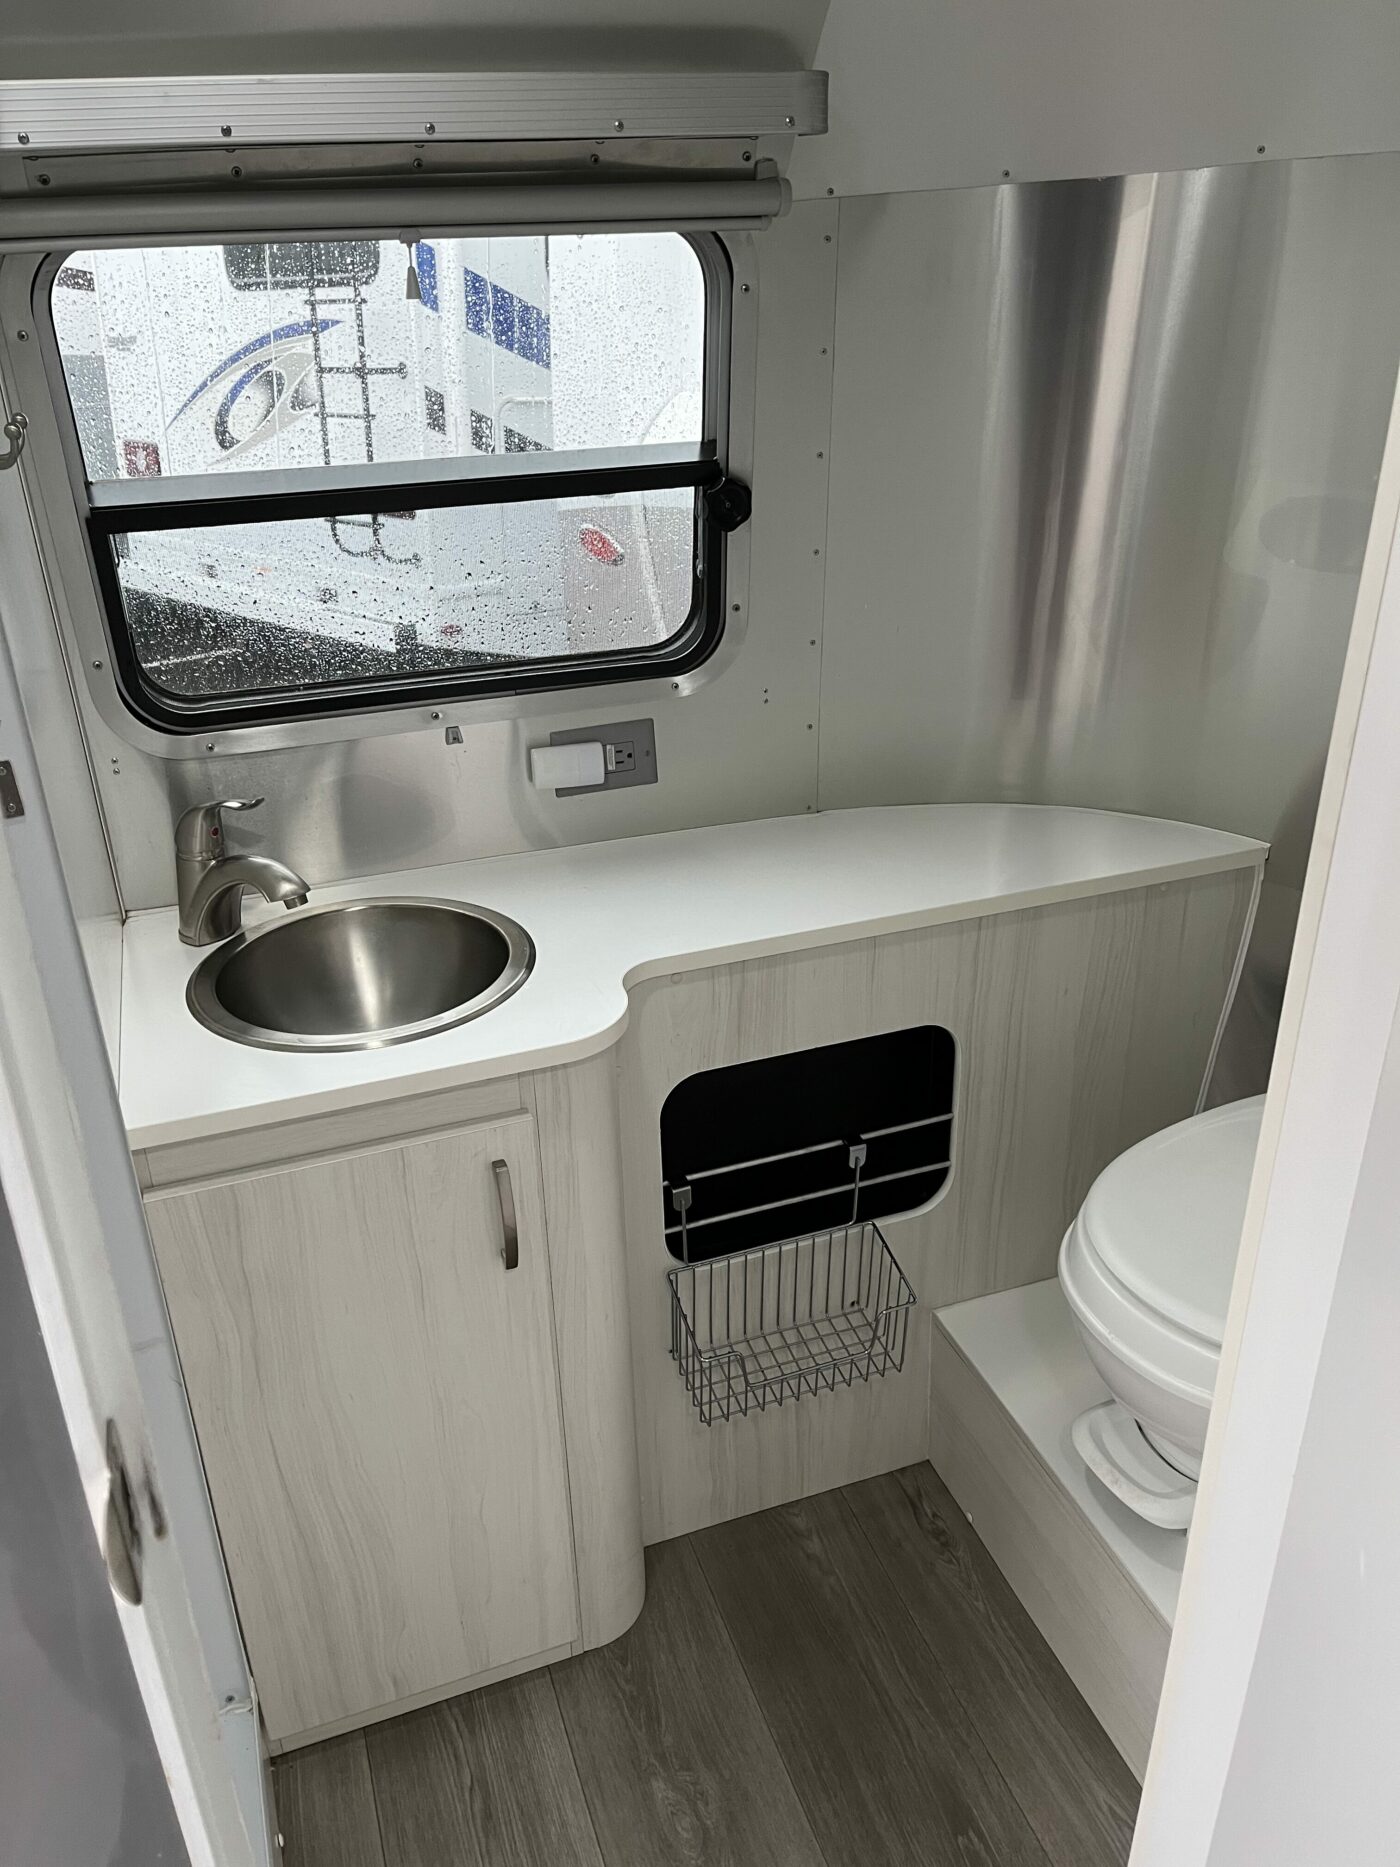 2017 22FT Sport For Sale In everett, Washington - Airstream Marketplace